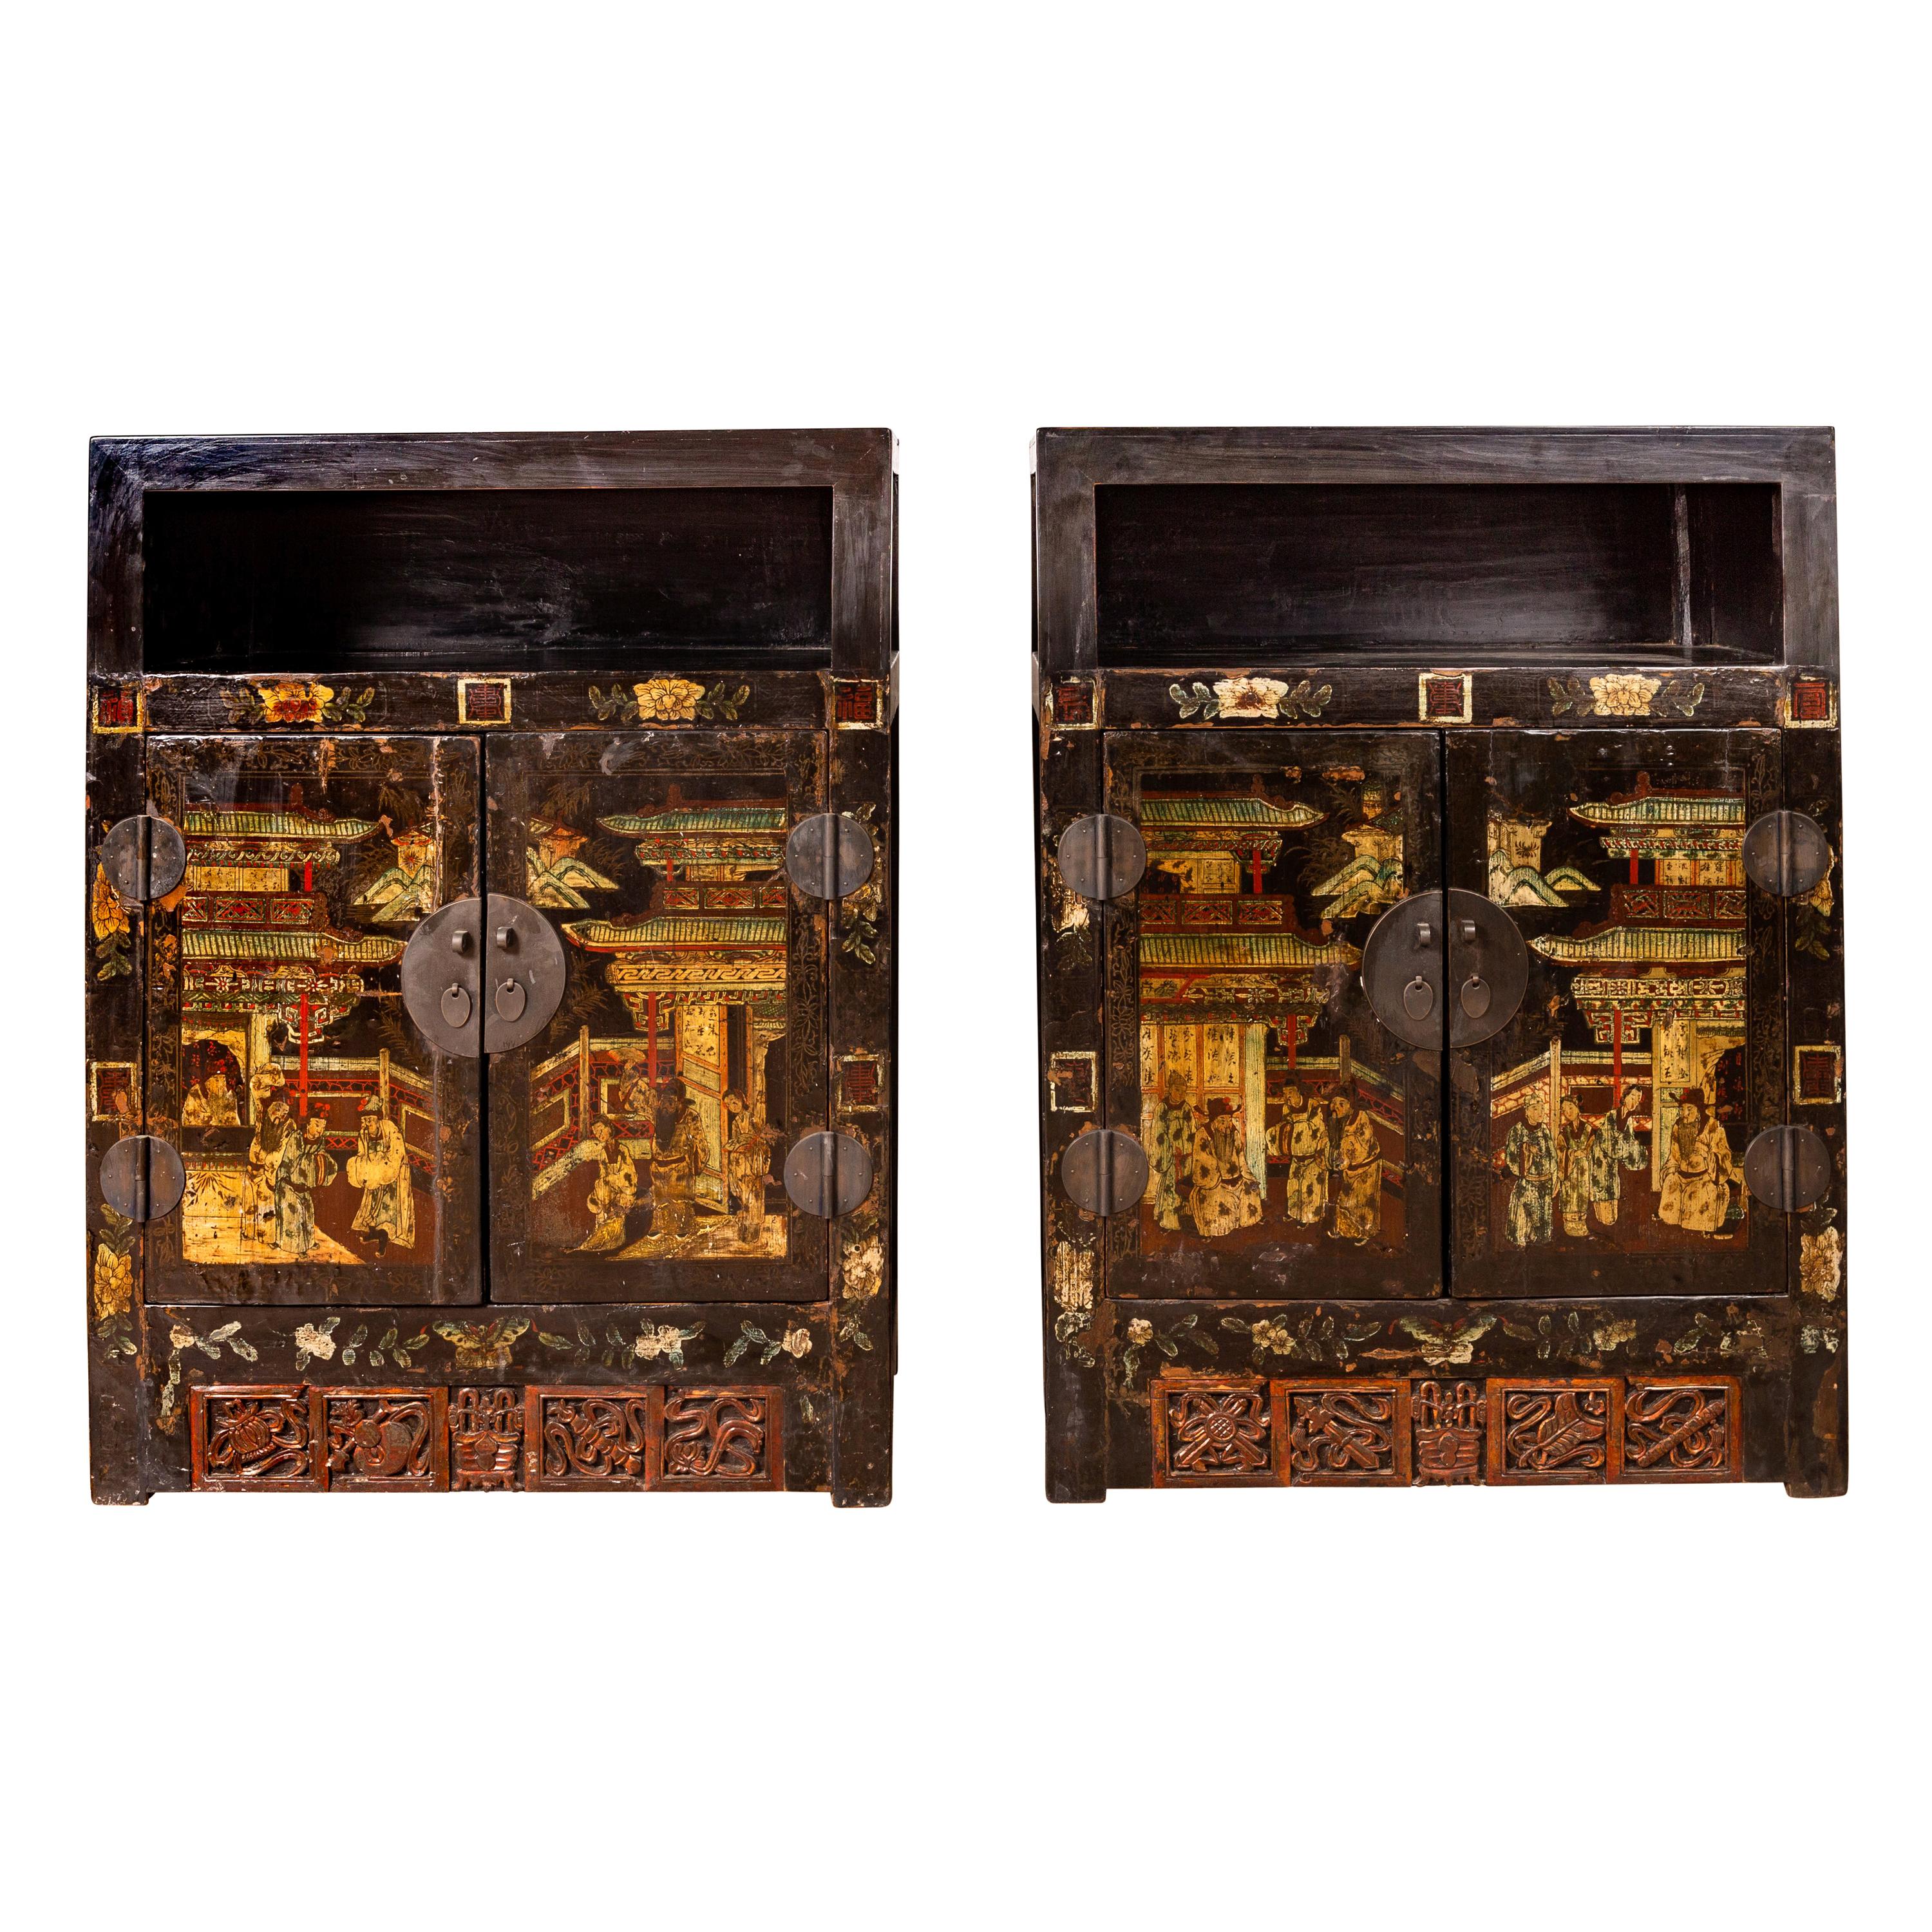 Can I paint my Chinese cabinet?